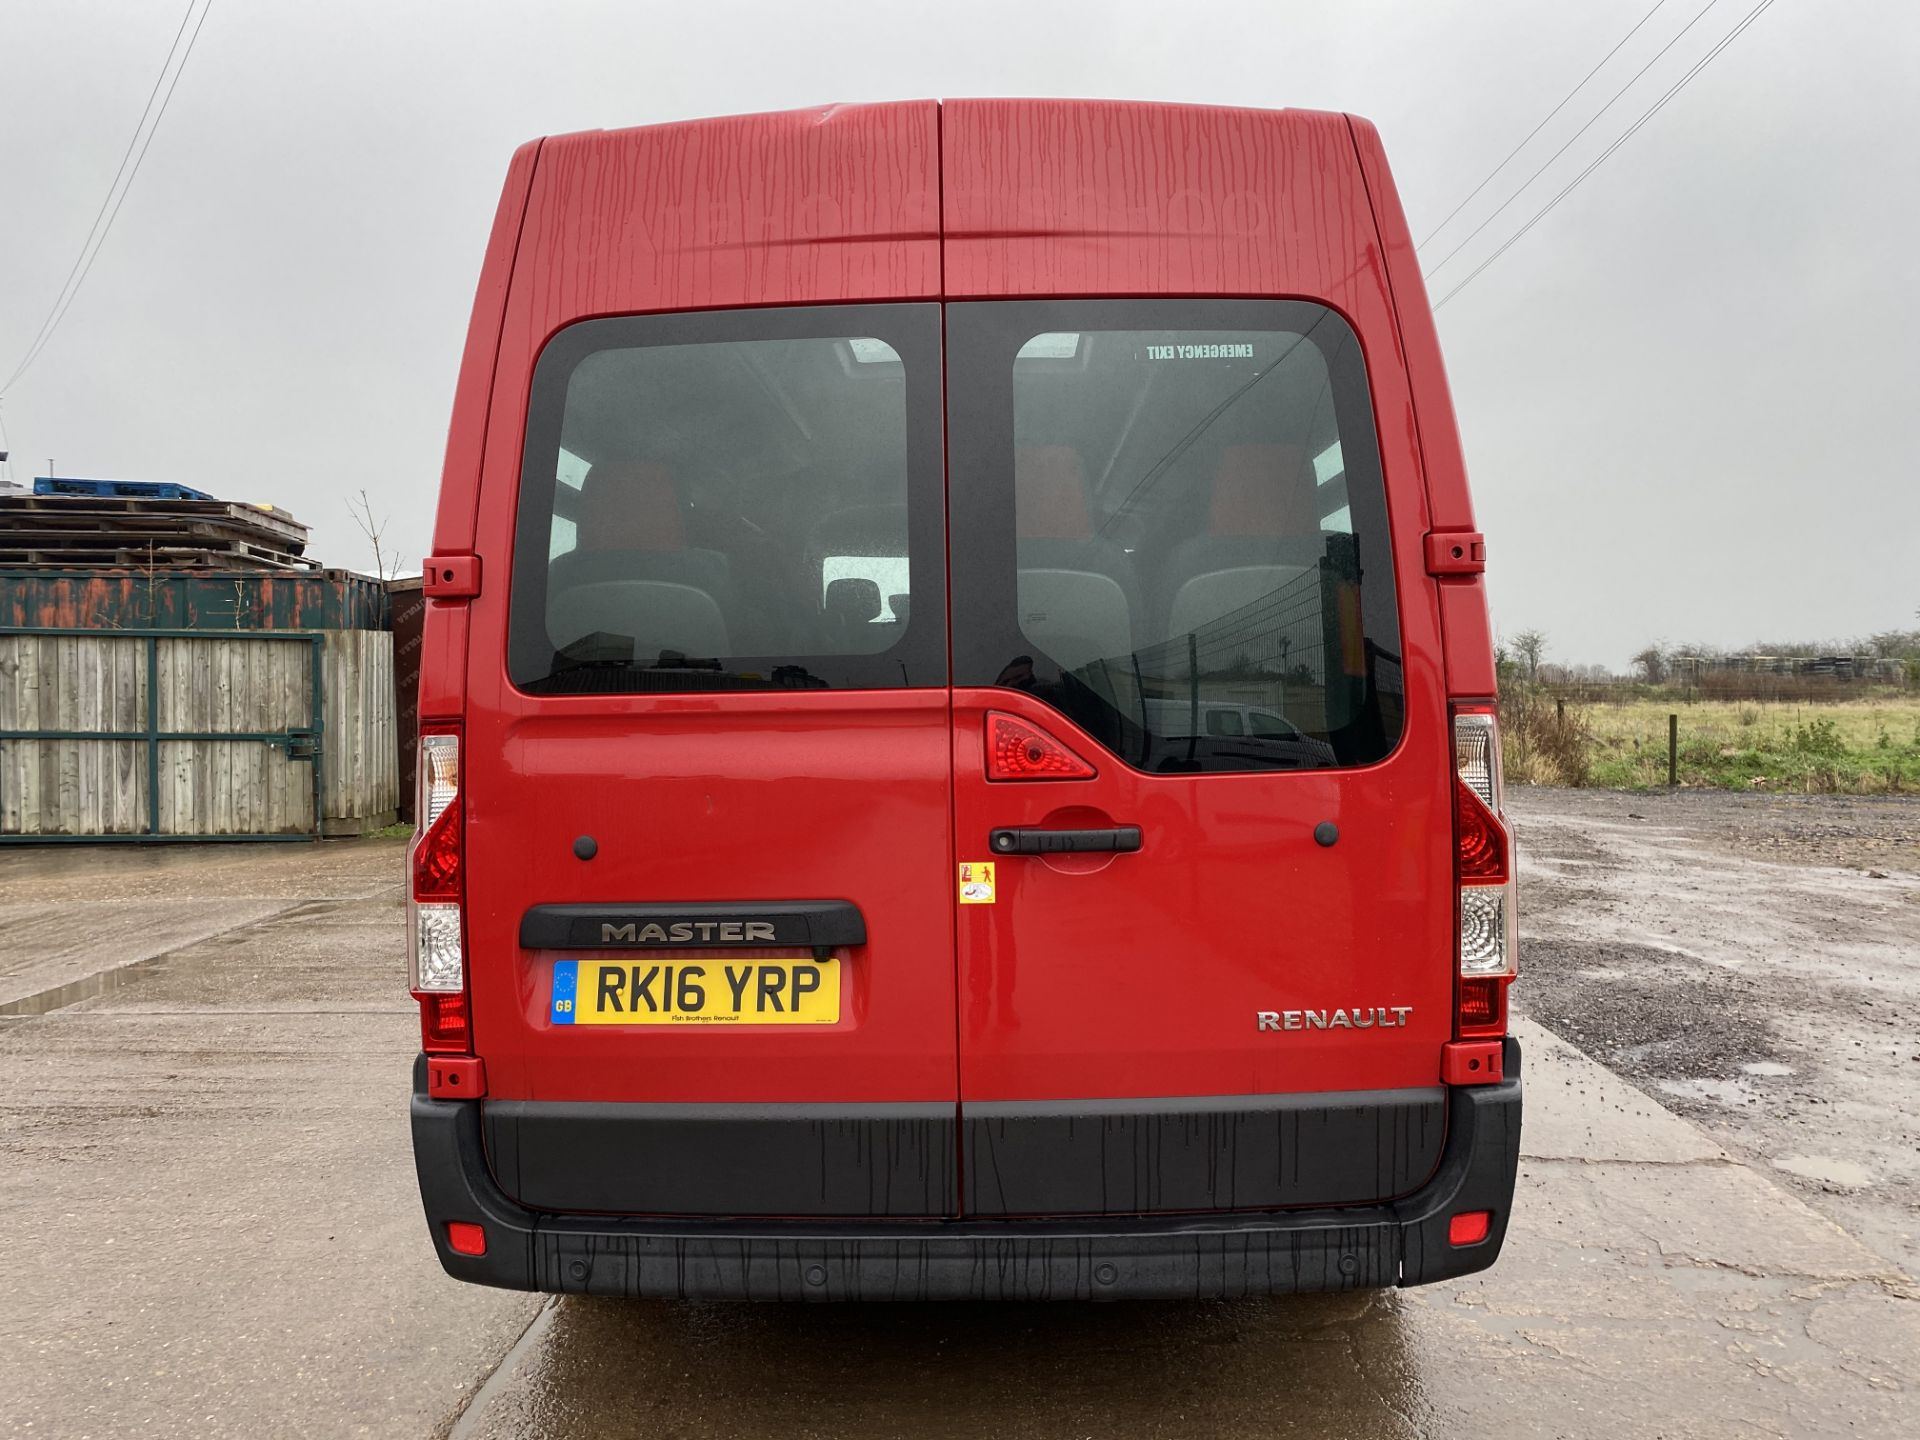 (On Sale) RENAULT MASTER LM39 2.3DCI (2016) BUSINESS ENERGY 'LWB" 17 SEATER LUXURY MINI BUS - Image 6 of 30